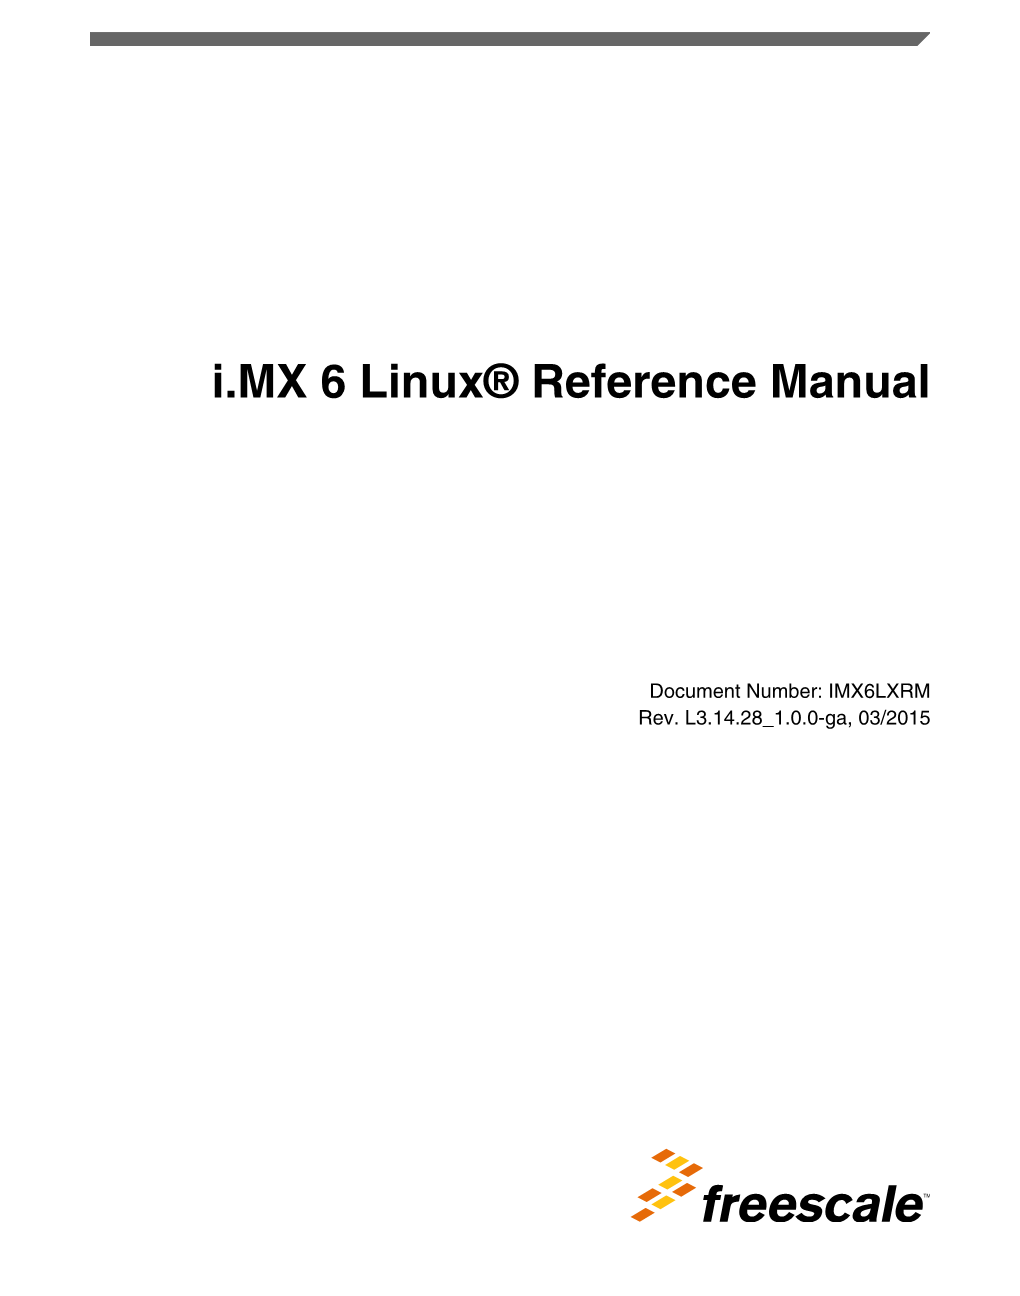 I.MX 6 Linux® Reference Manual